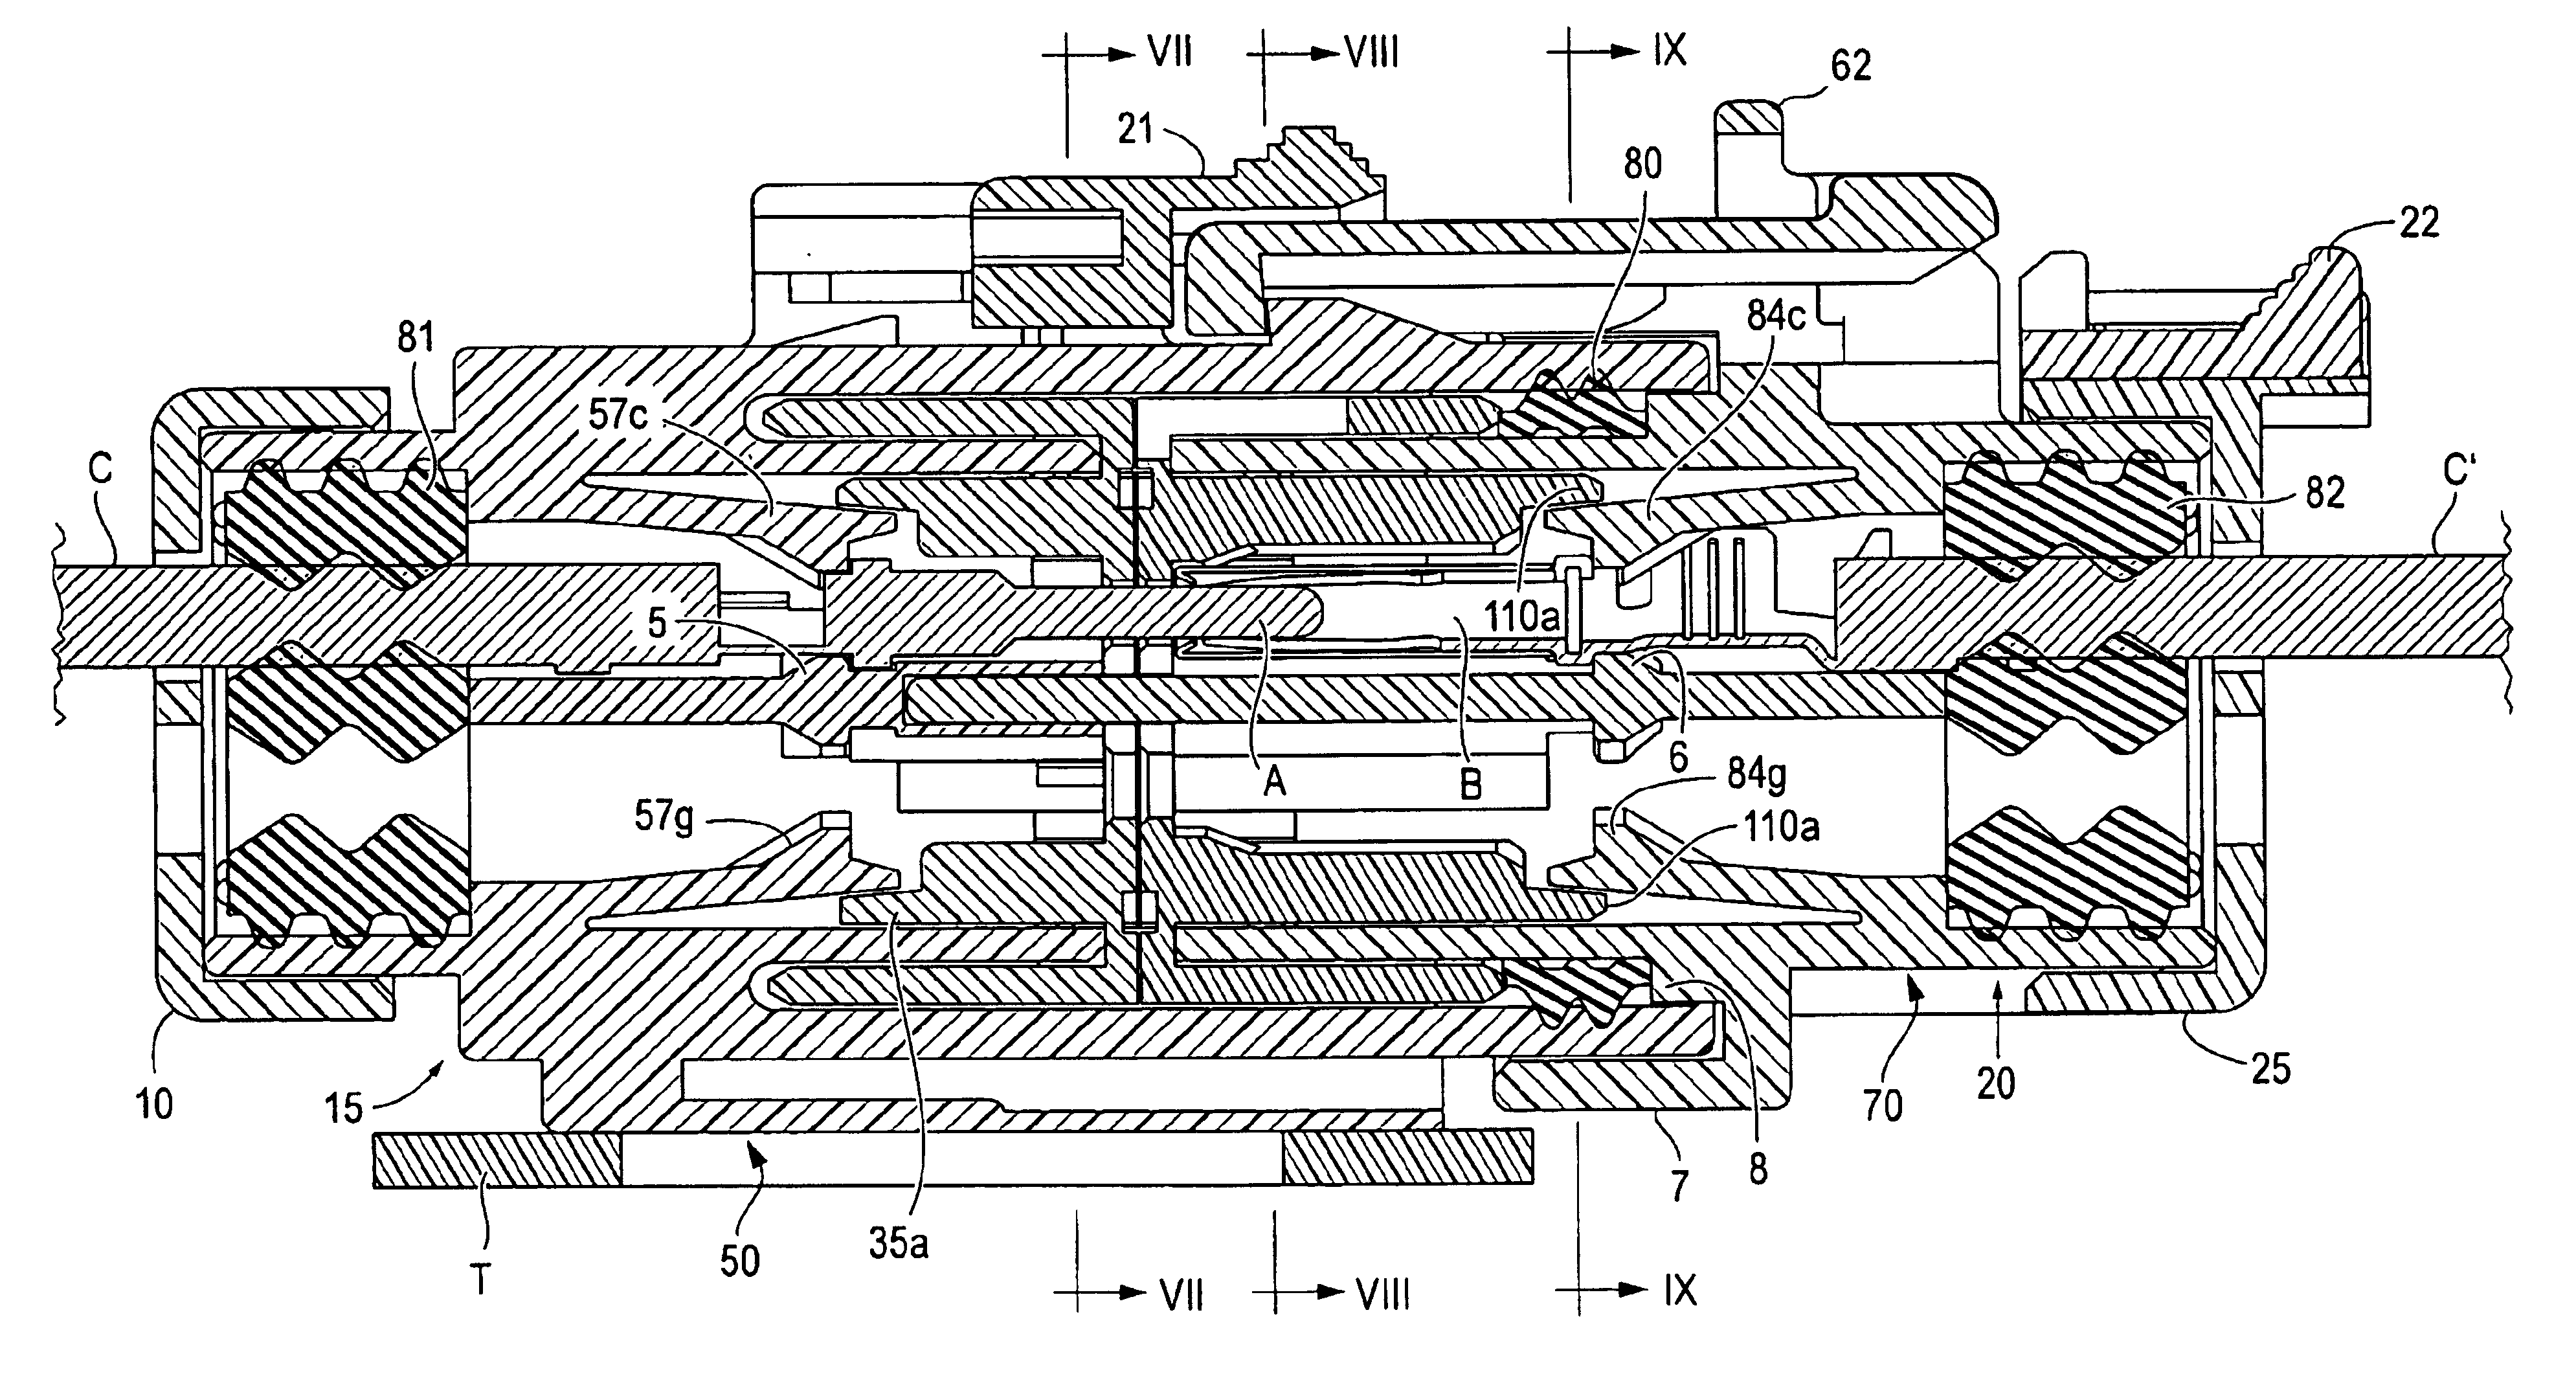 Electrical connector apparatus, methods and articles of manufacture